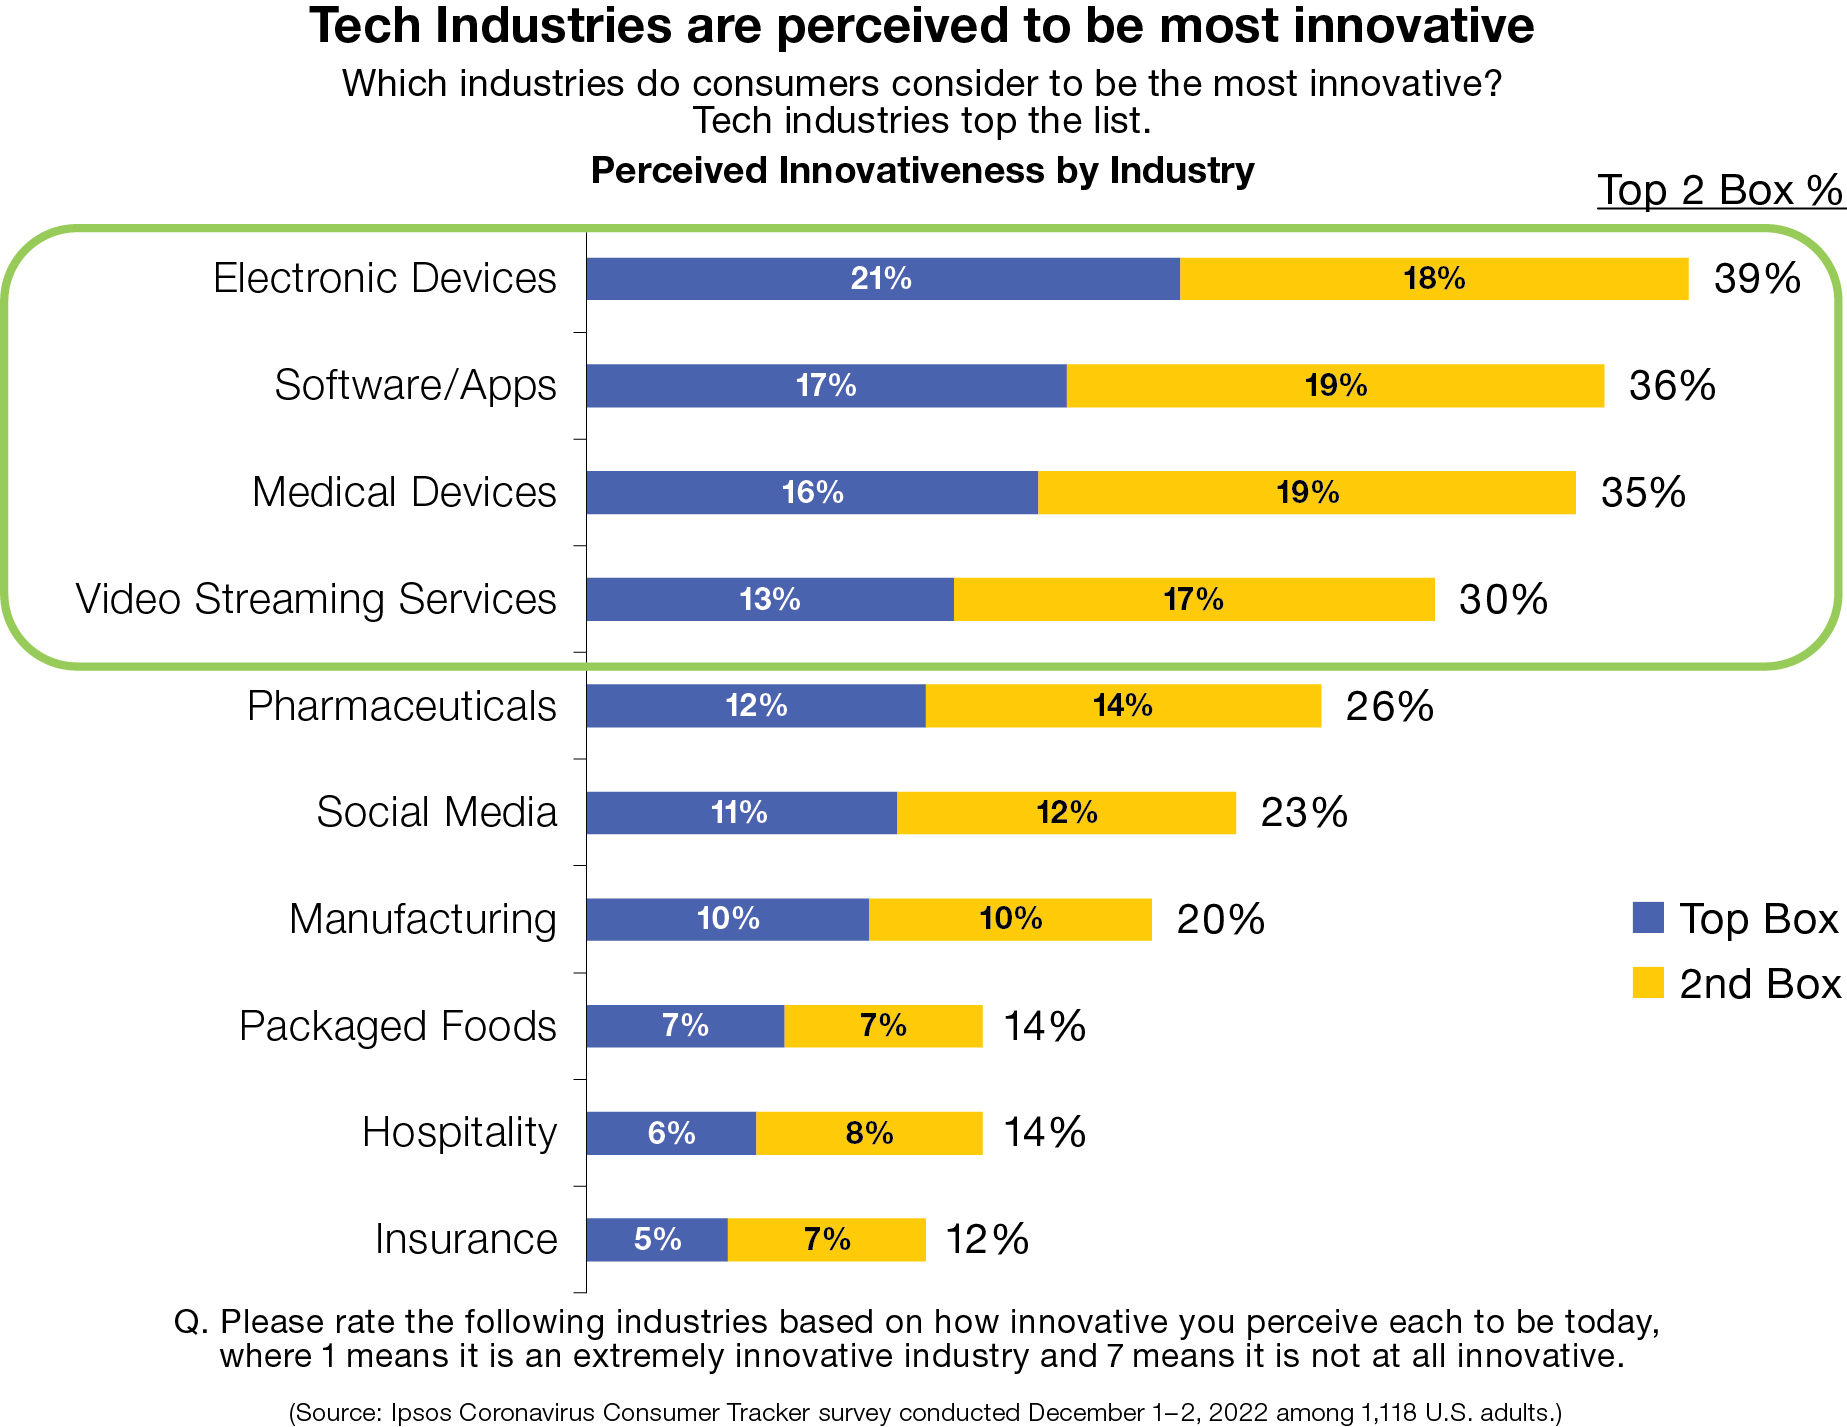 Tech industries are perceived to be most innovative